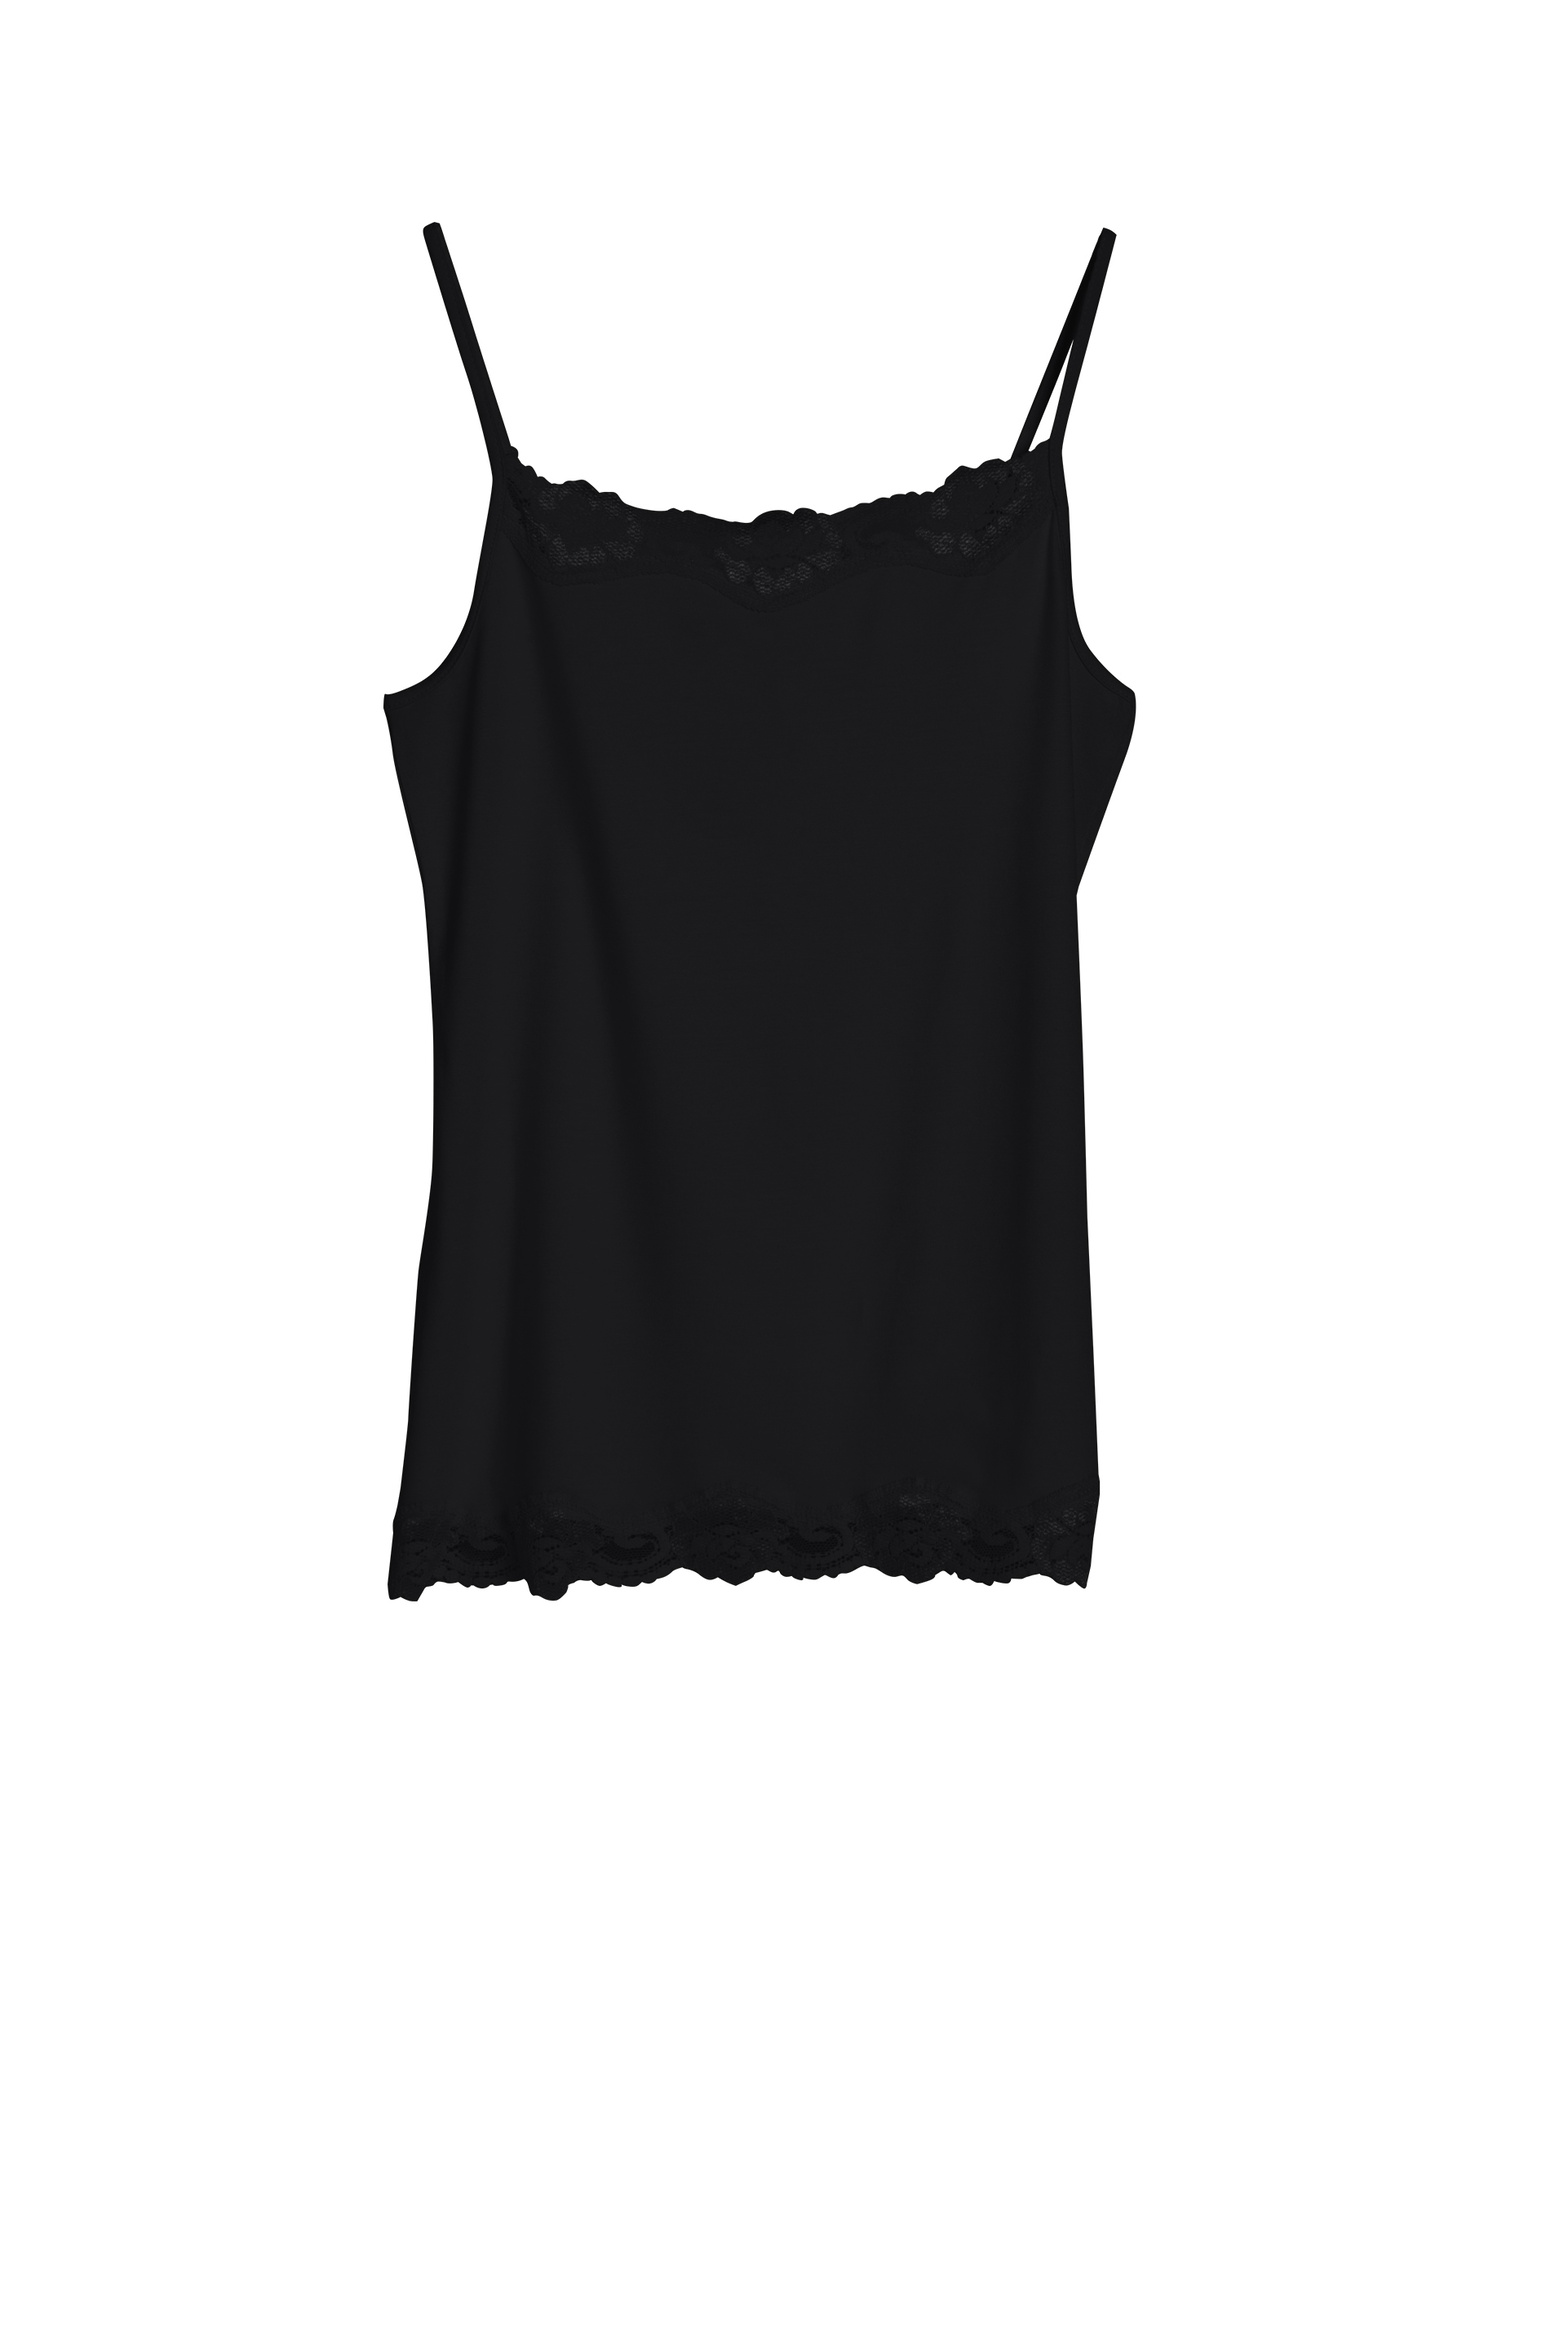 7200_lace_camisole_black_new.jpg